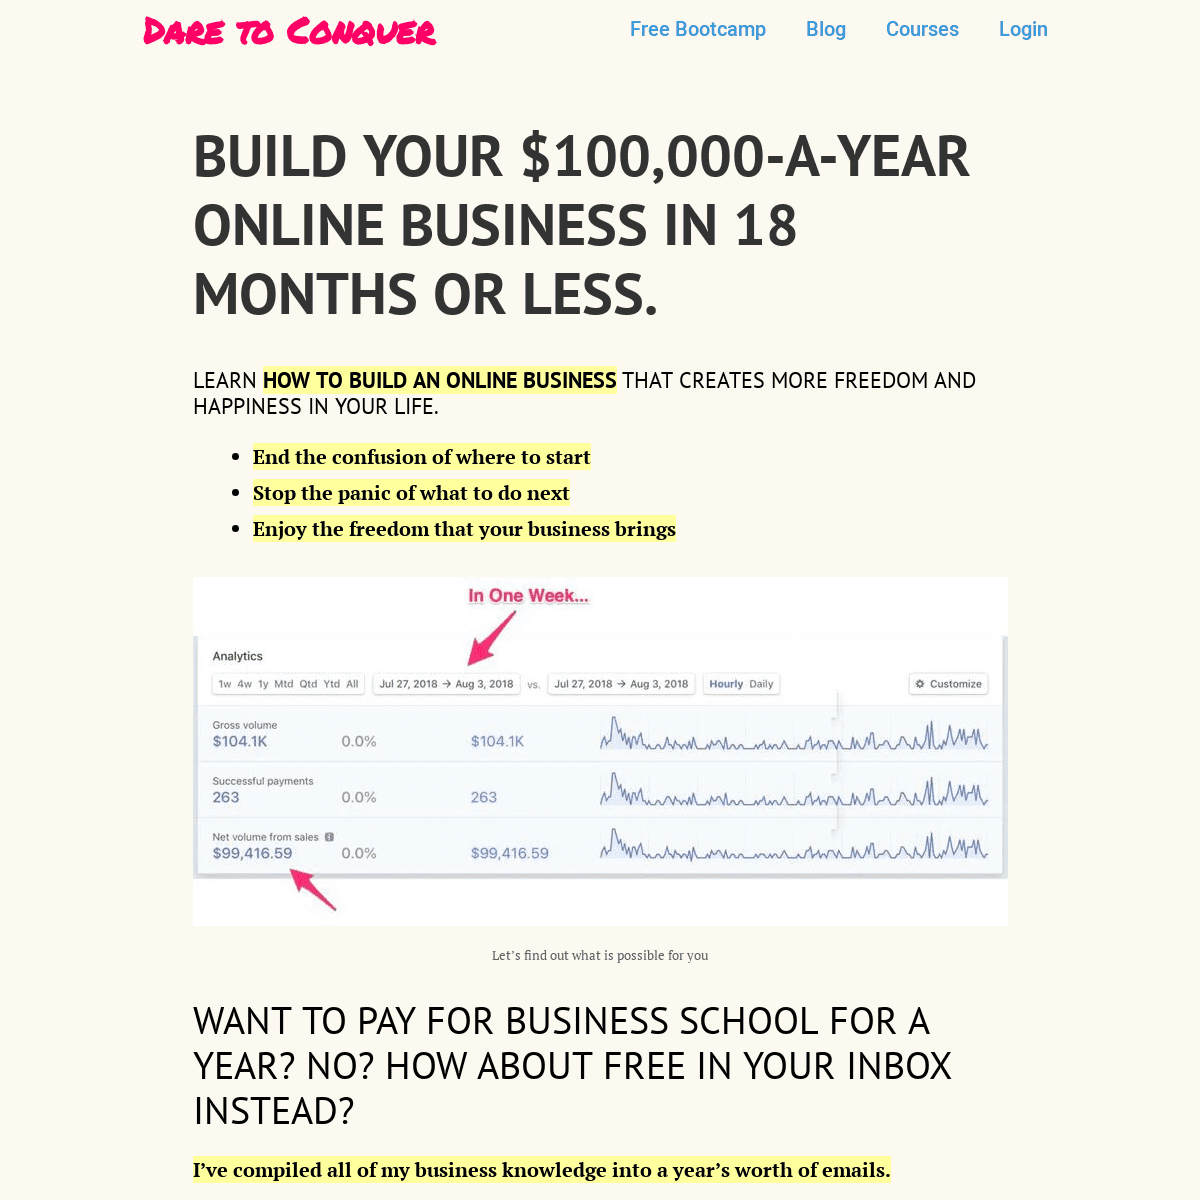 BUILD YOUR $100,000-A-YEAR ONLINE BUSINESS IN 18 MONTHS OR LESS.